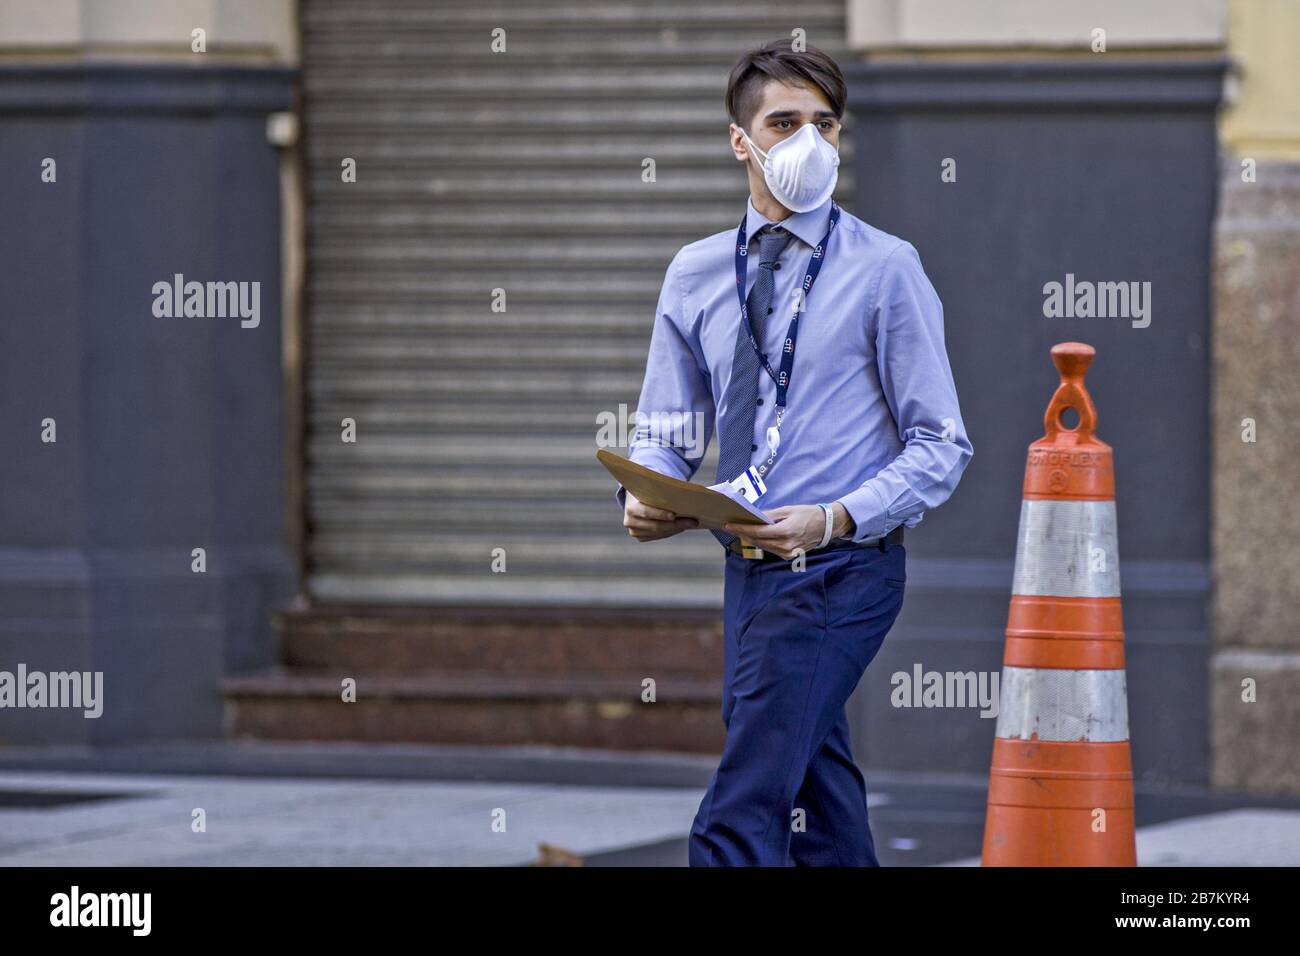 Buenos Aires, Federal Capital, Argentina. 16th Mar, 2020. More and more people wear masks in Buenos Aires as a protection measure against the Coronavirus. Credit: Roberto Almeida Aveledo/ZUMA Wire/Alamy Live News Stock Photo